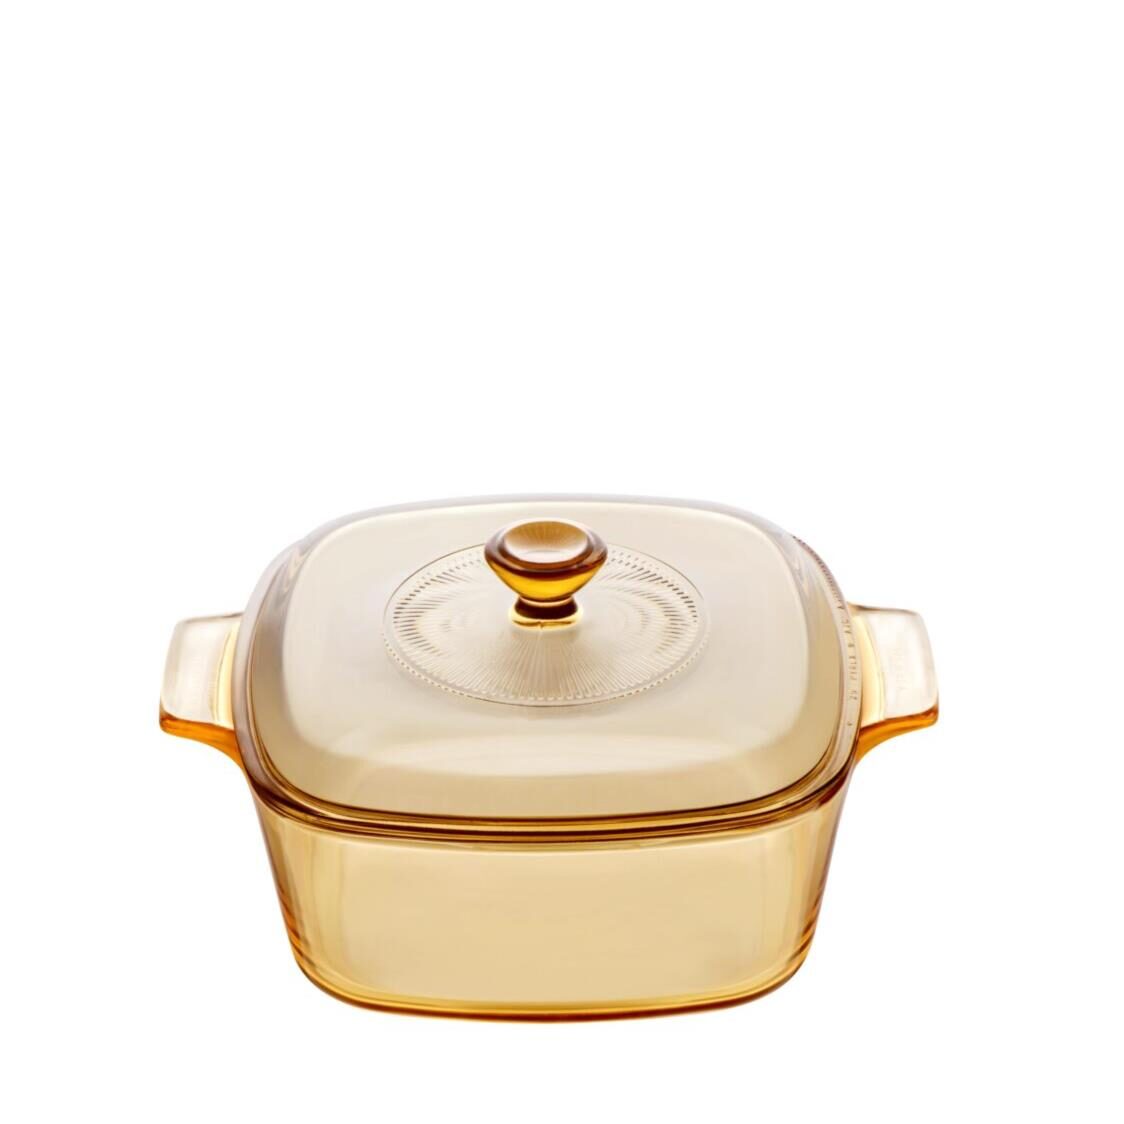 Vision Reserve 15L Covered Casserole Amber VSA-15CL1